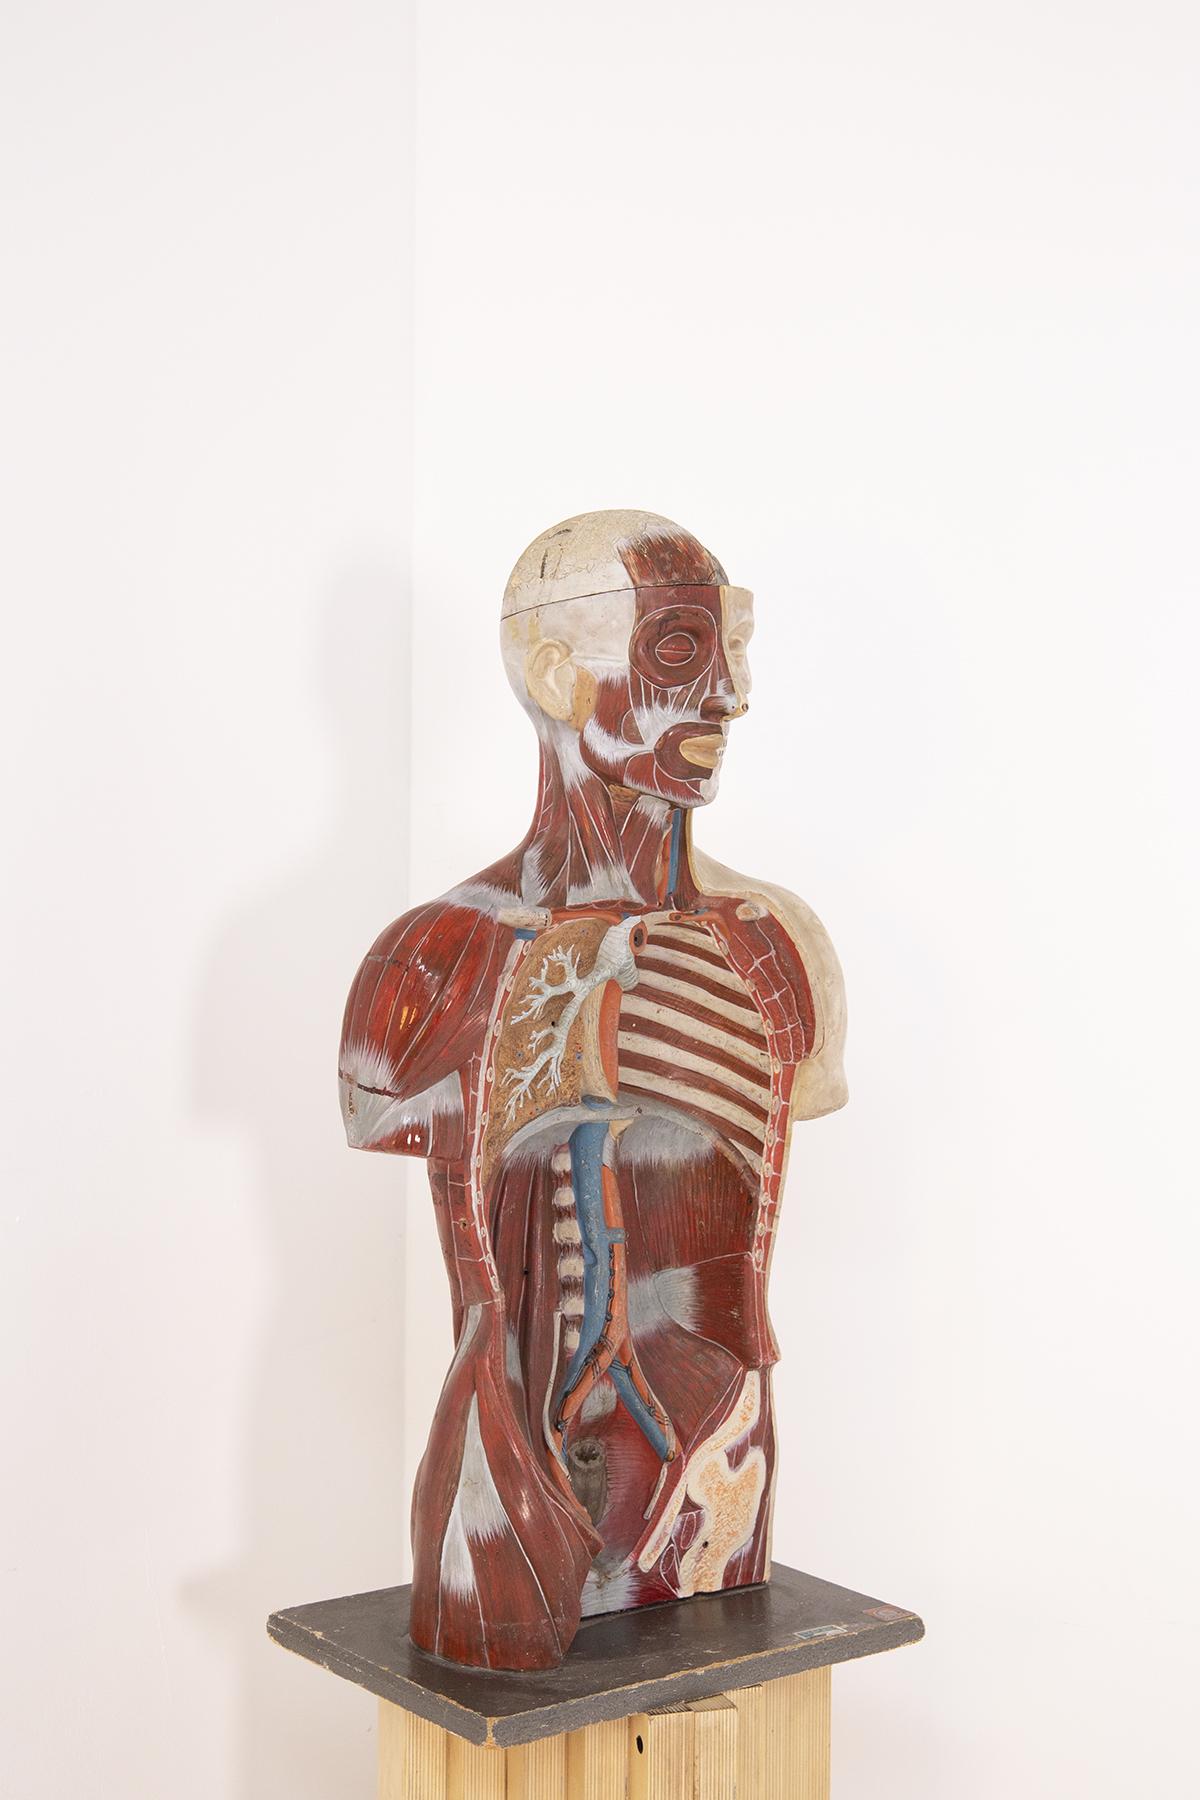 Mid-century Italian anatomical torso produced in the 1960s by Produzione Scientifica Paravia, known for its accurate anatomy models.
This anatomical model was created by improving upon papermaking methods begun in about 1891. 1960's anatomical